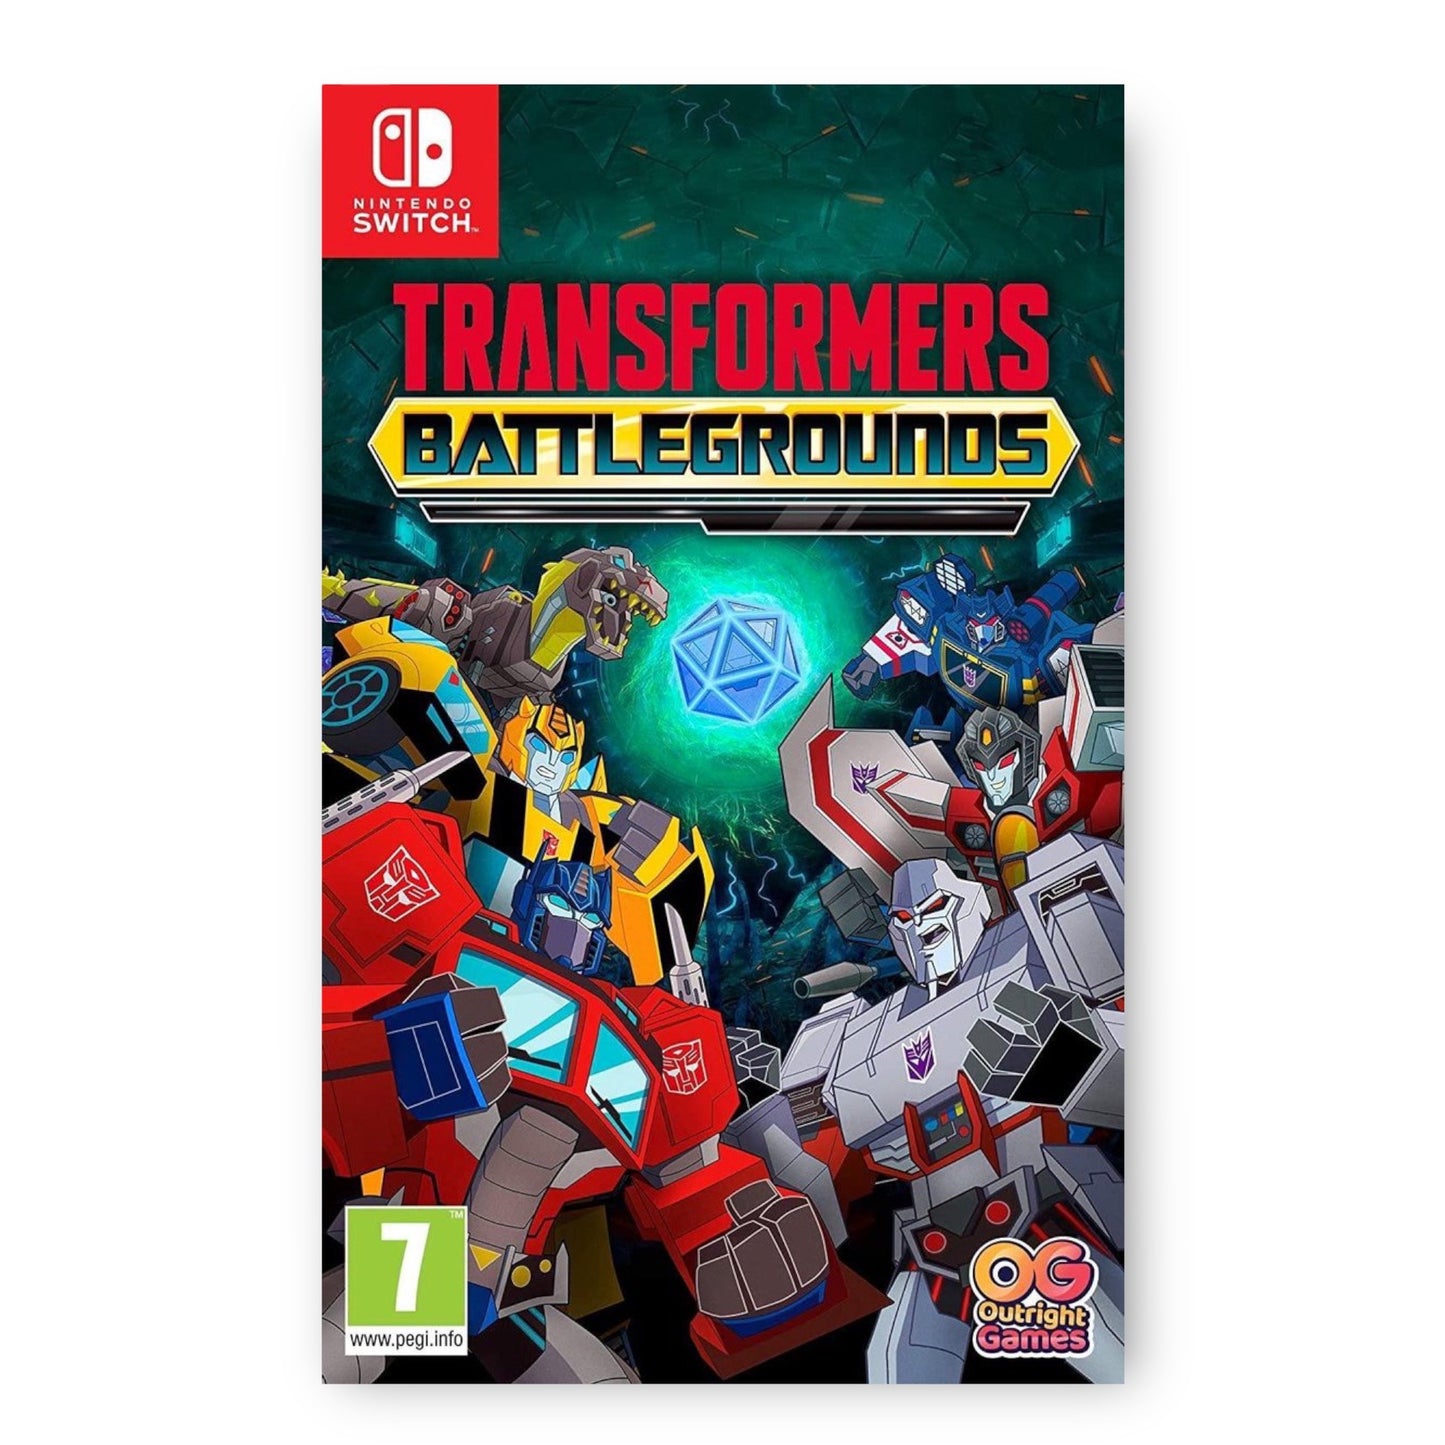 Nintendo Switch Game Transformers Battle Grounds LET OP DOWNLOAD CODE.